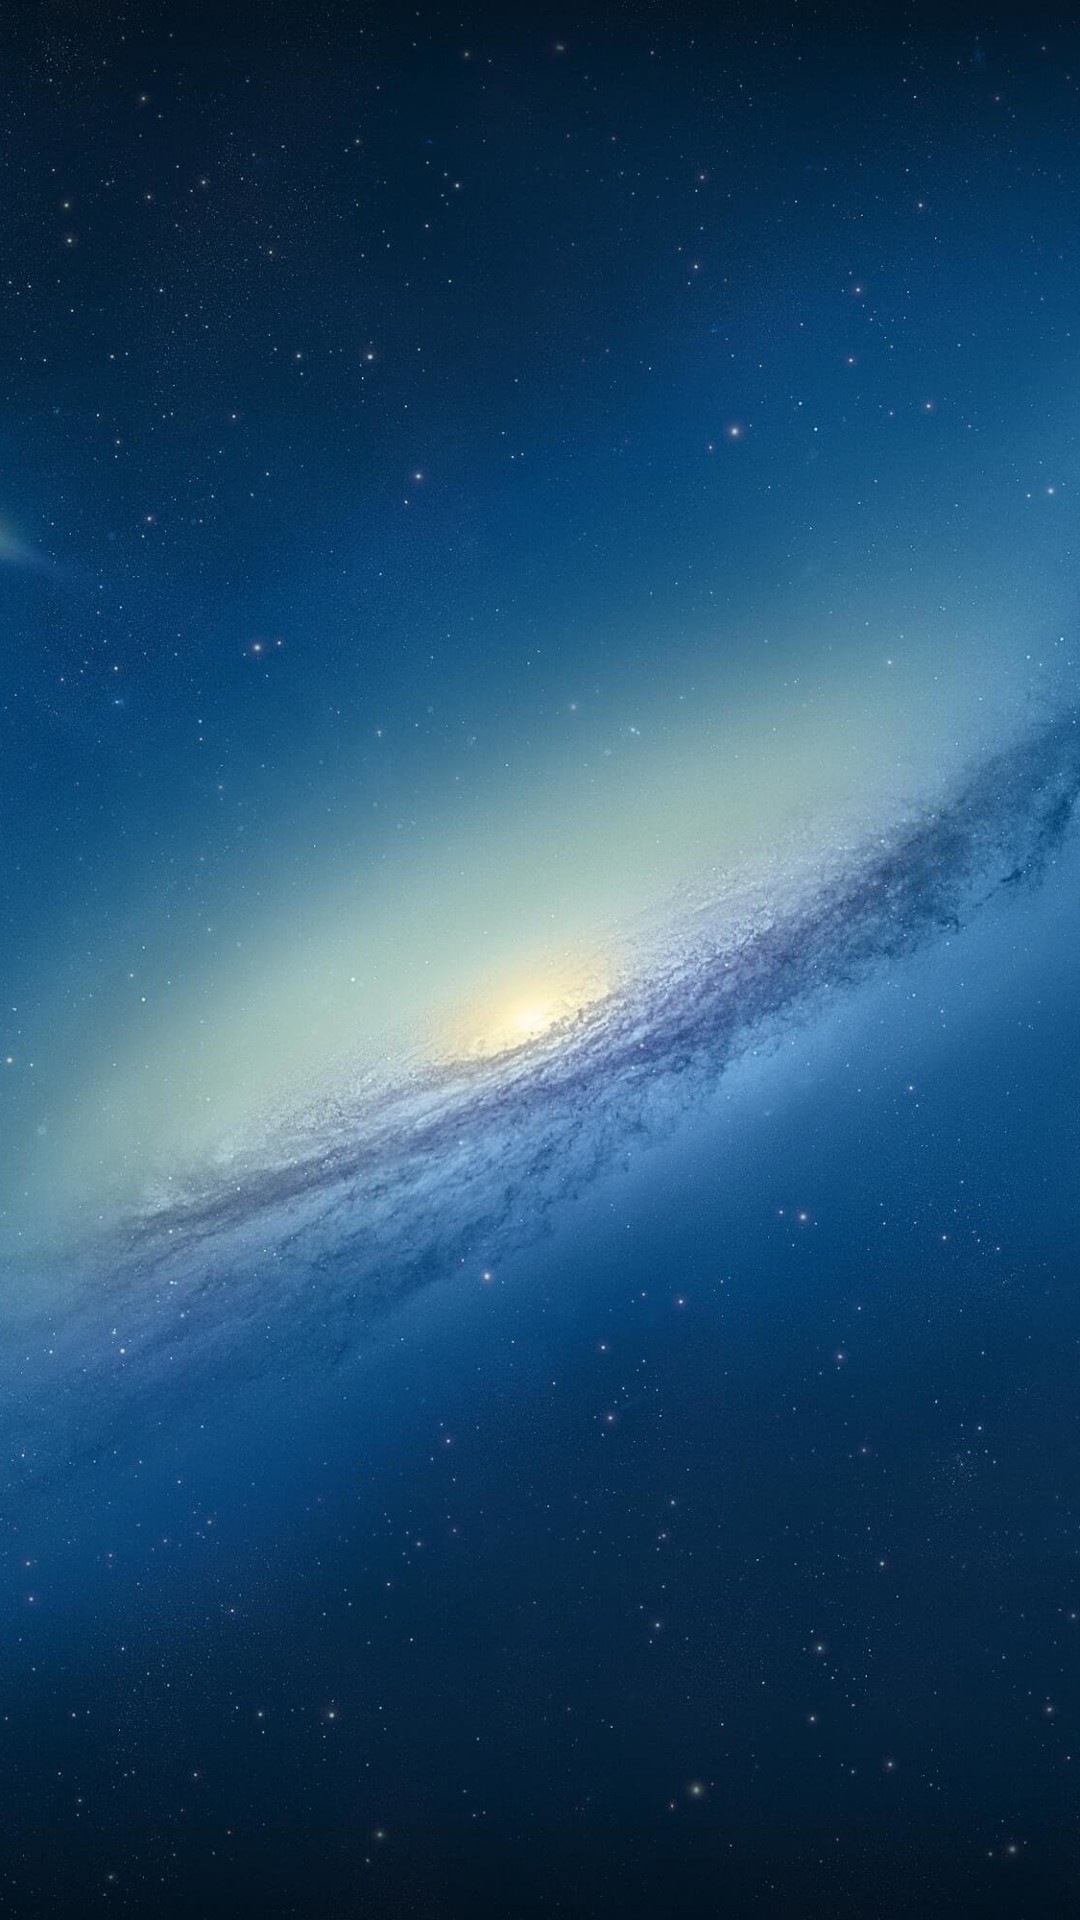 Galaxy NGC 3190 Wallpaper for HTC One